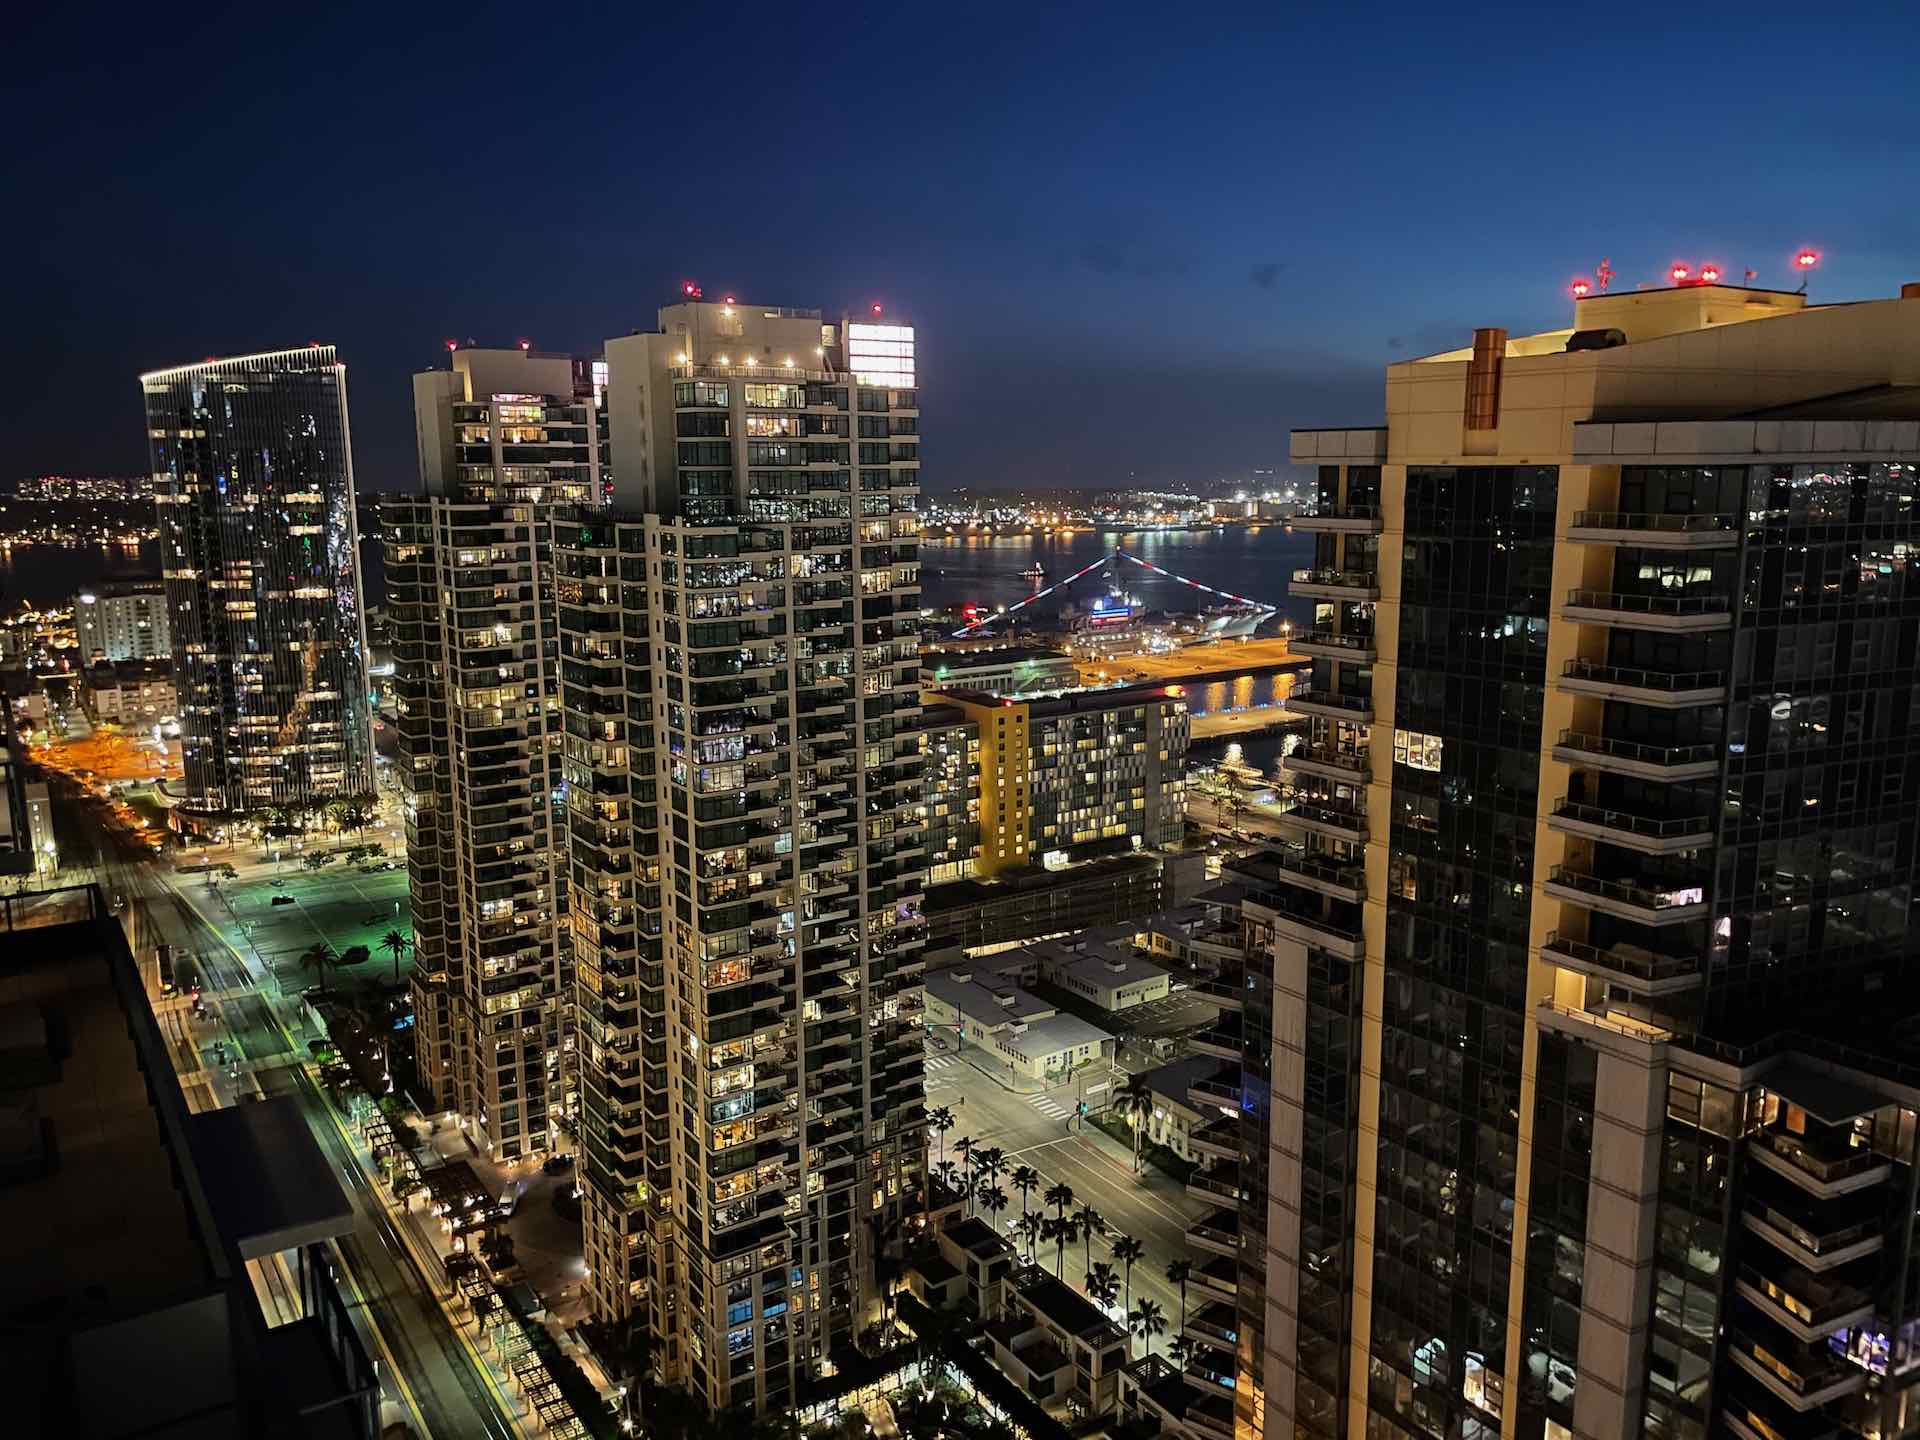 Luxury condo towers in the San Diego Columbia District